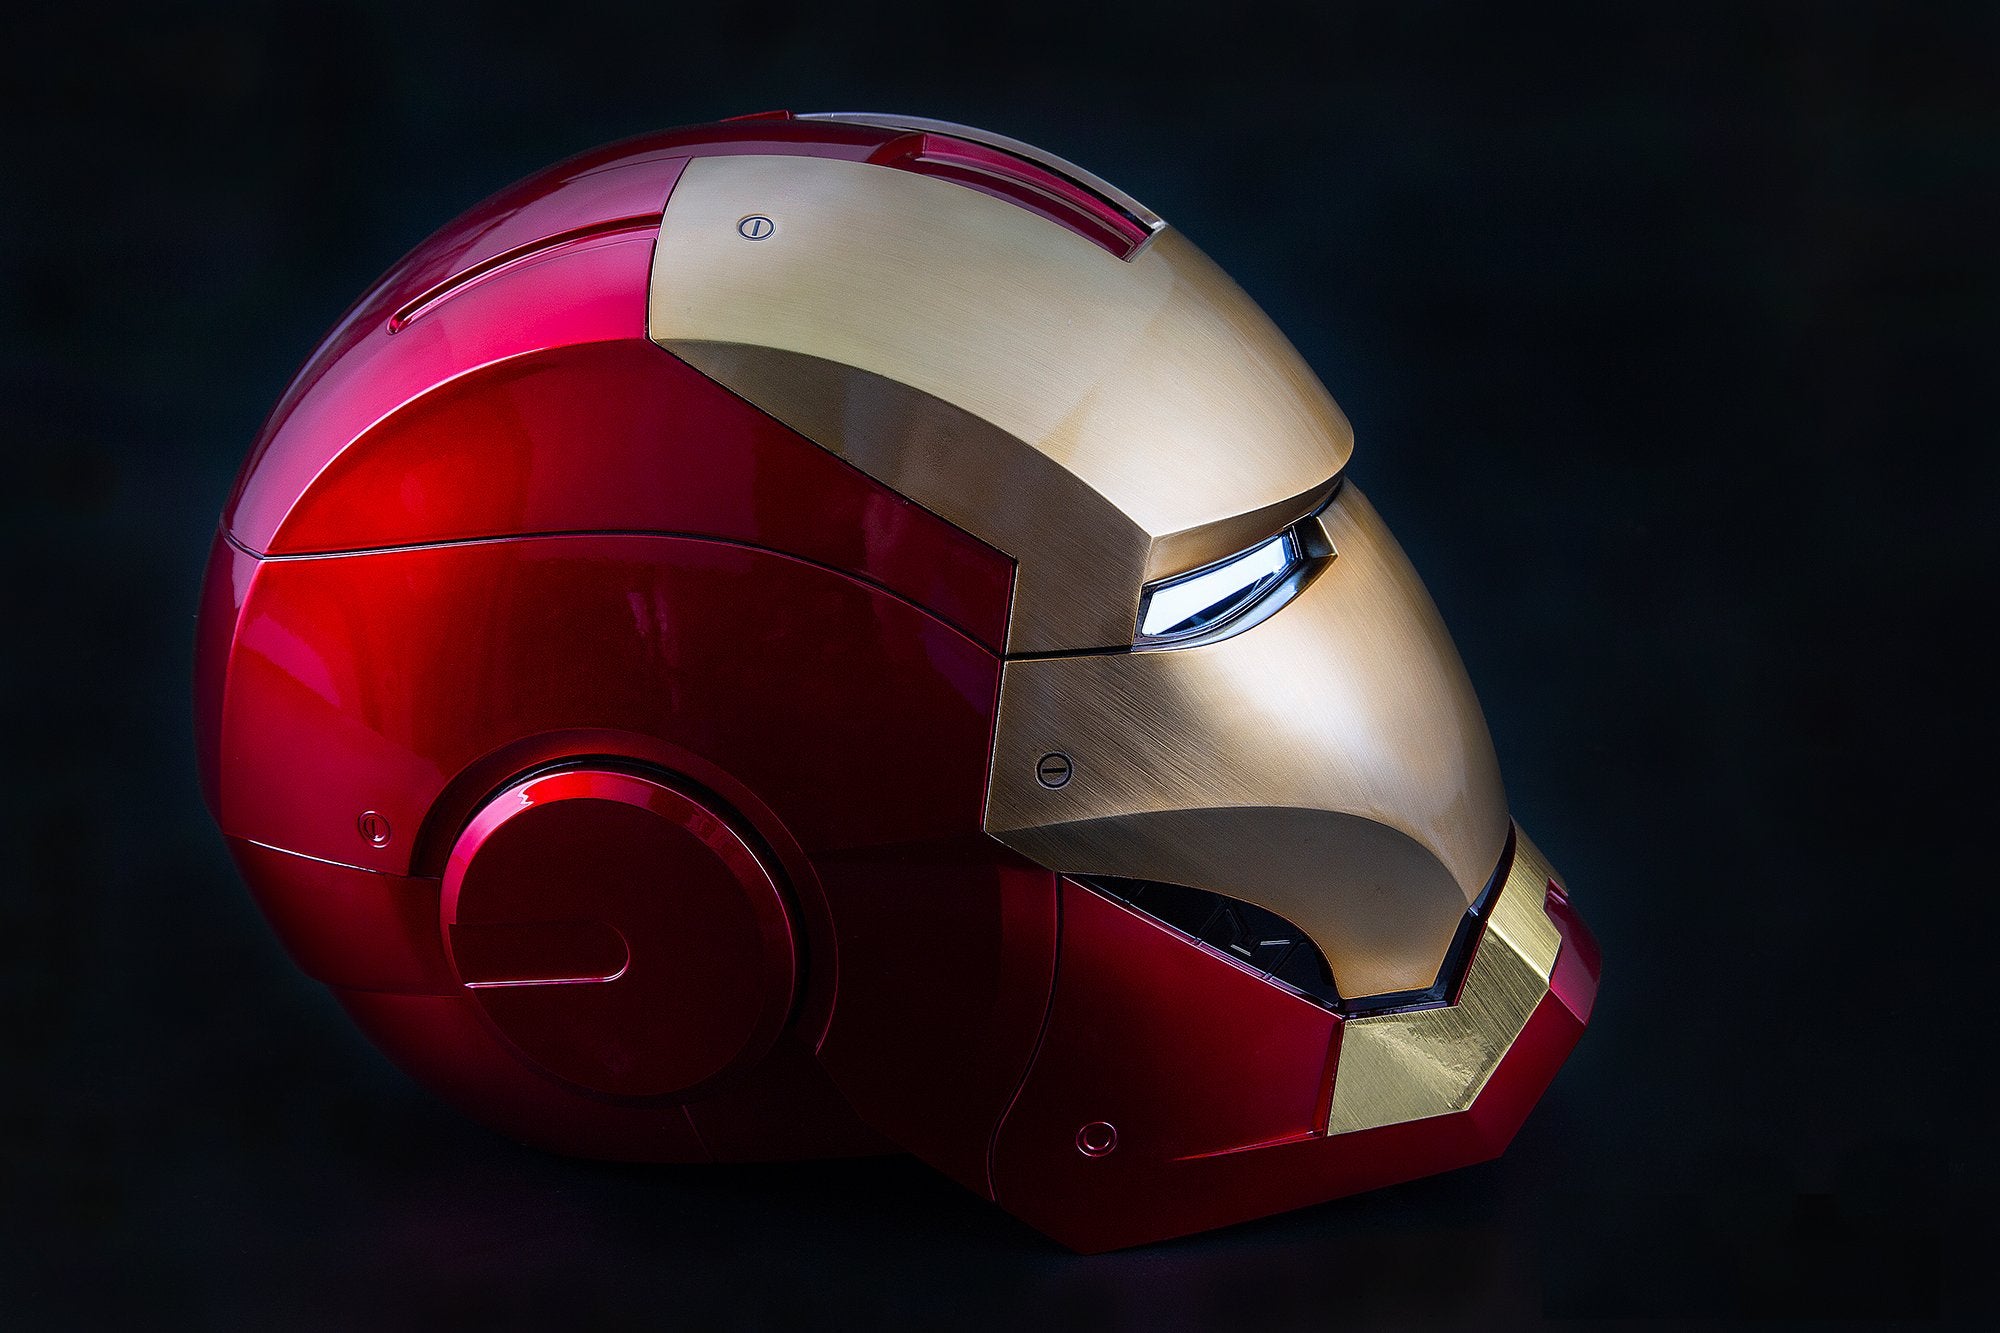 Killerbody - 1:1 Scale High End Replica - Avengers - Iron Man Mark VII Helmet (Wearable Voice Control Brushed Finish) - Marvelous Toys